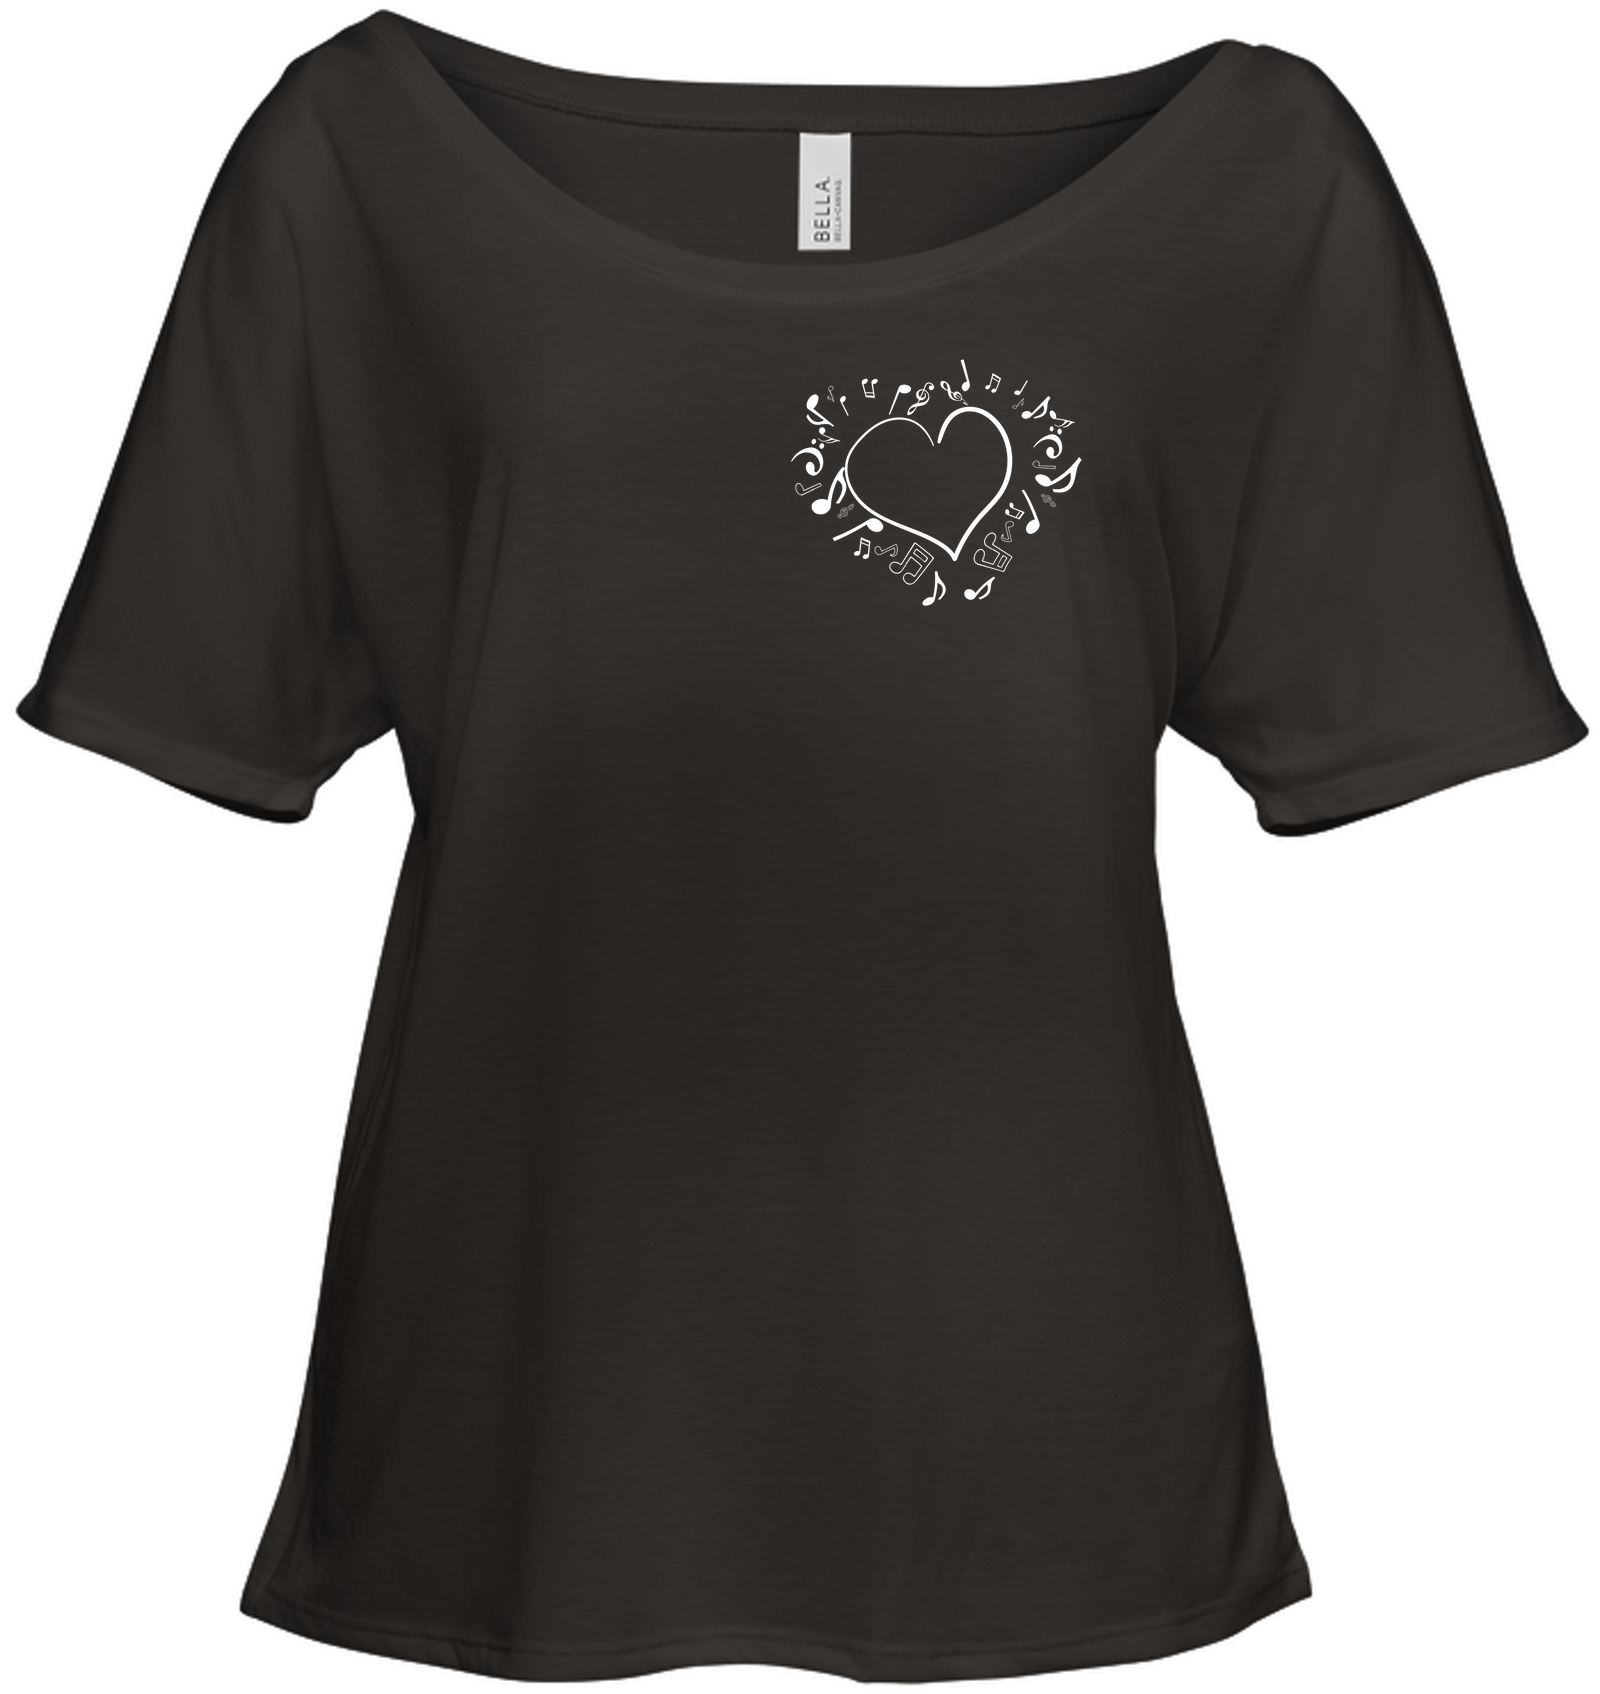 Floating Notes Heart White (Pocket Size) - Bella + Canvas Women's Slouchy Tee